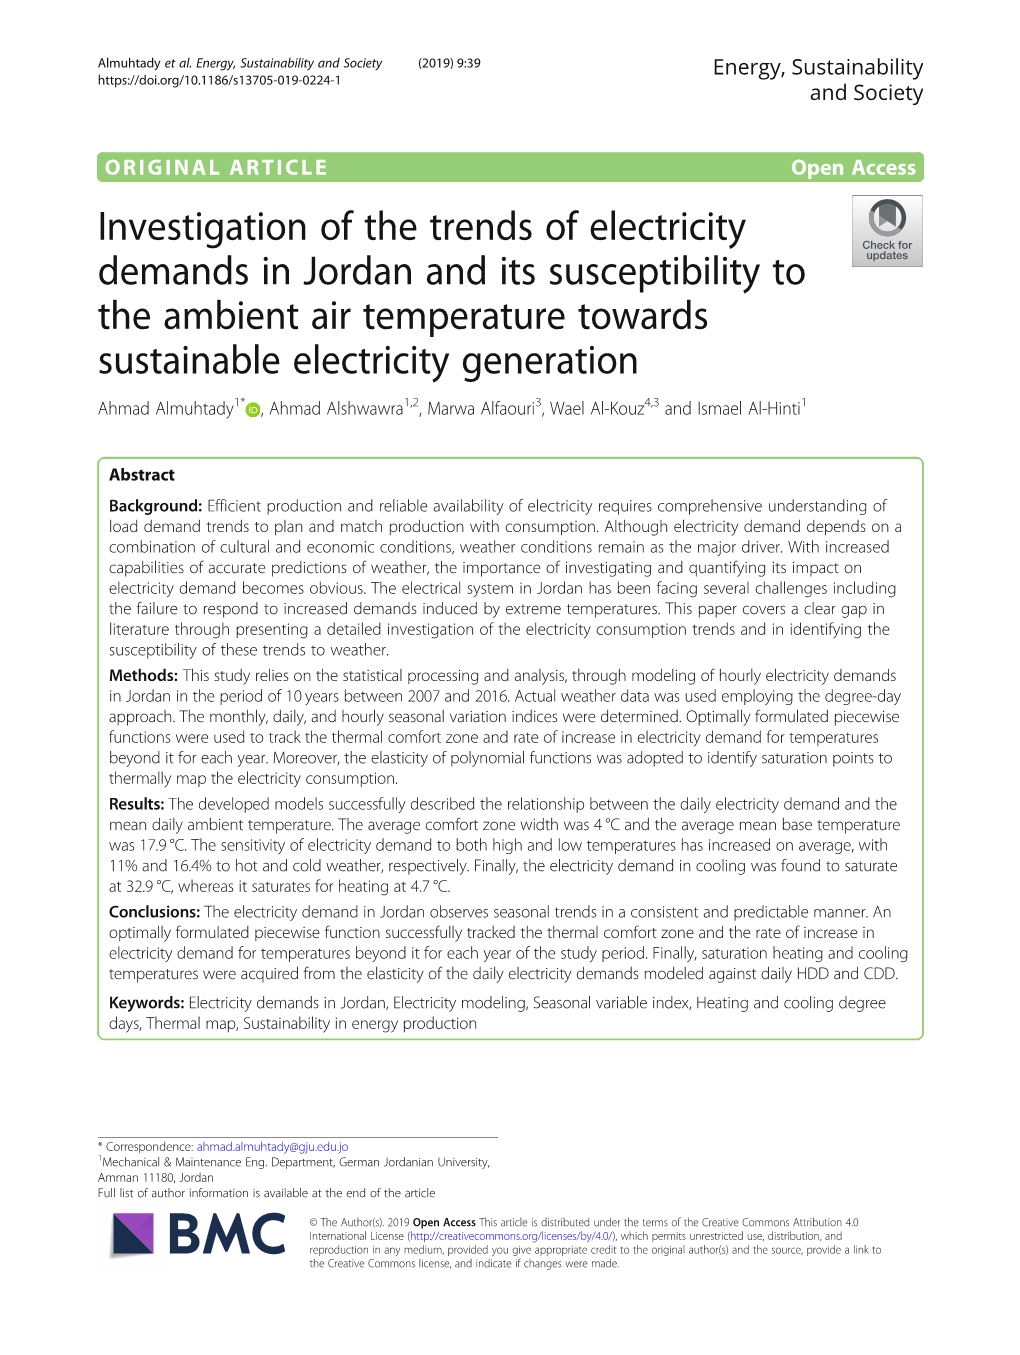 Investigation of the Trends of Electricity Demands in Jordan and Its